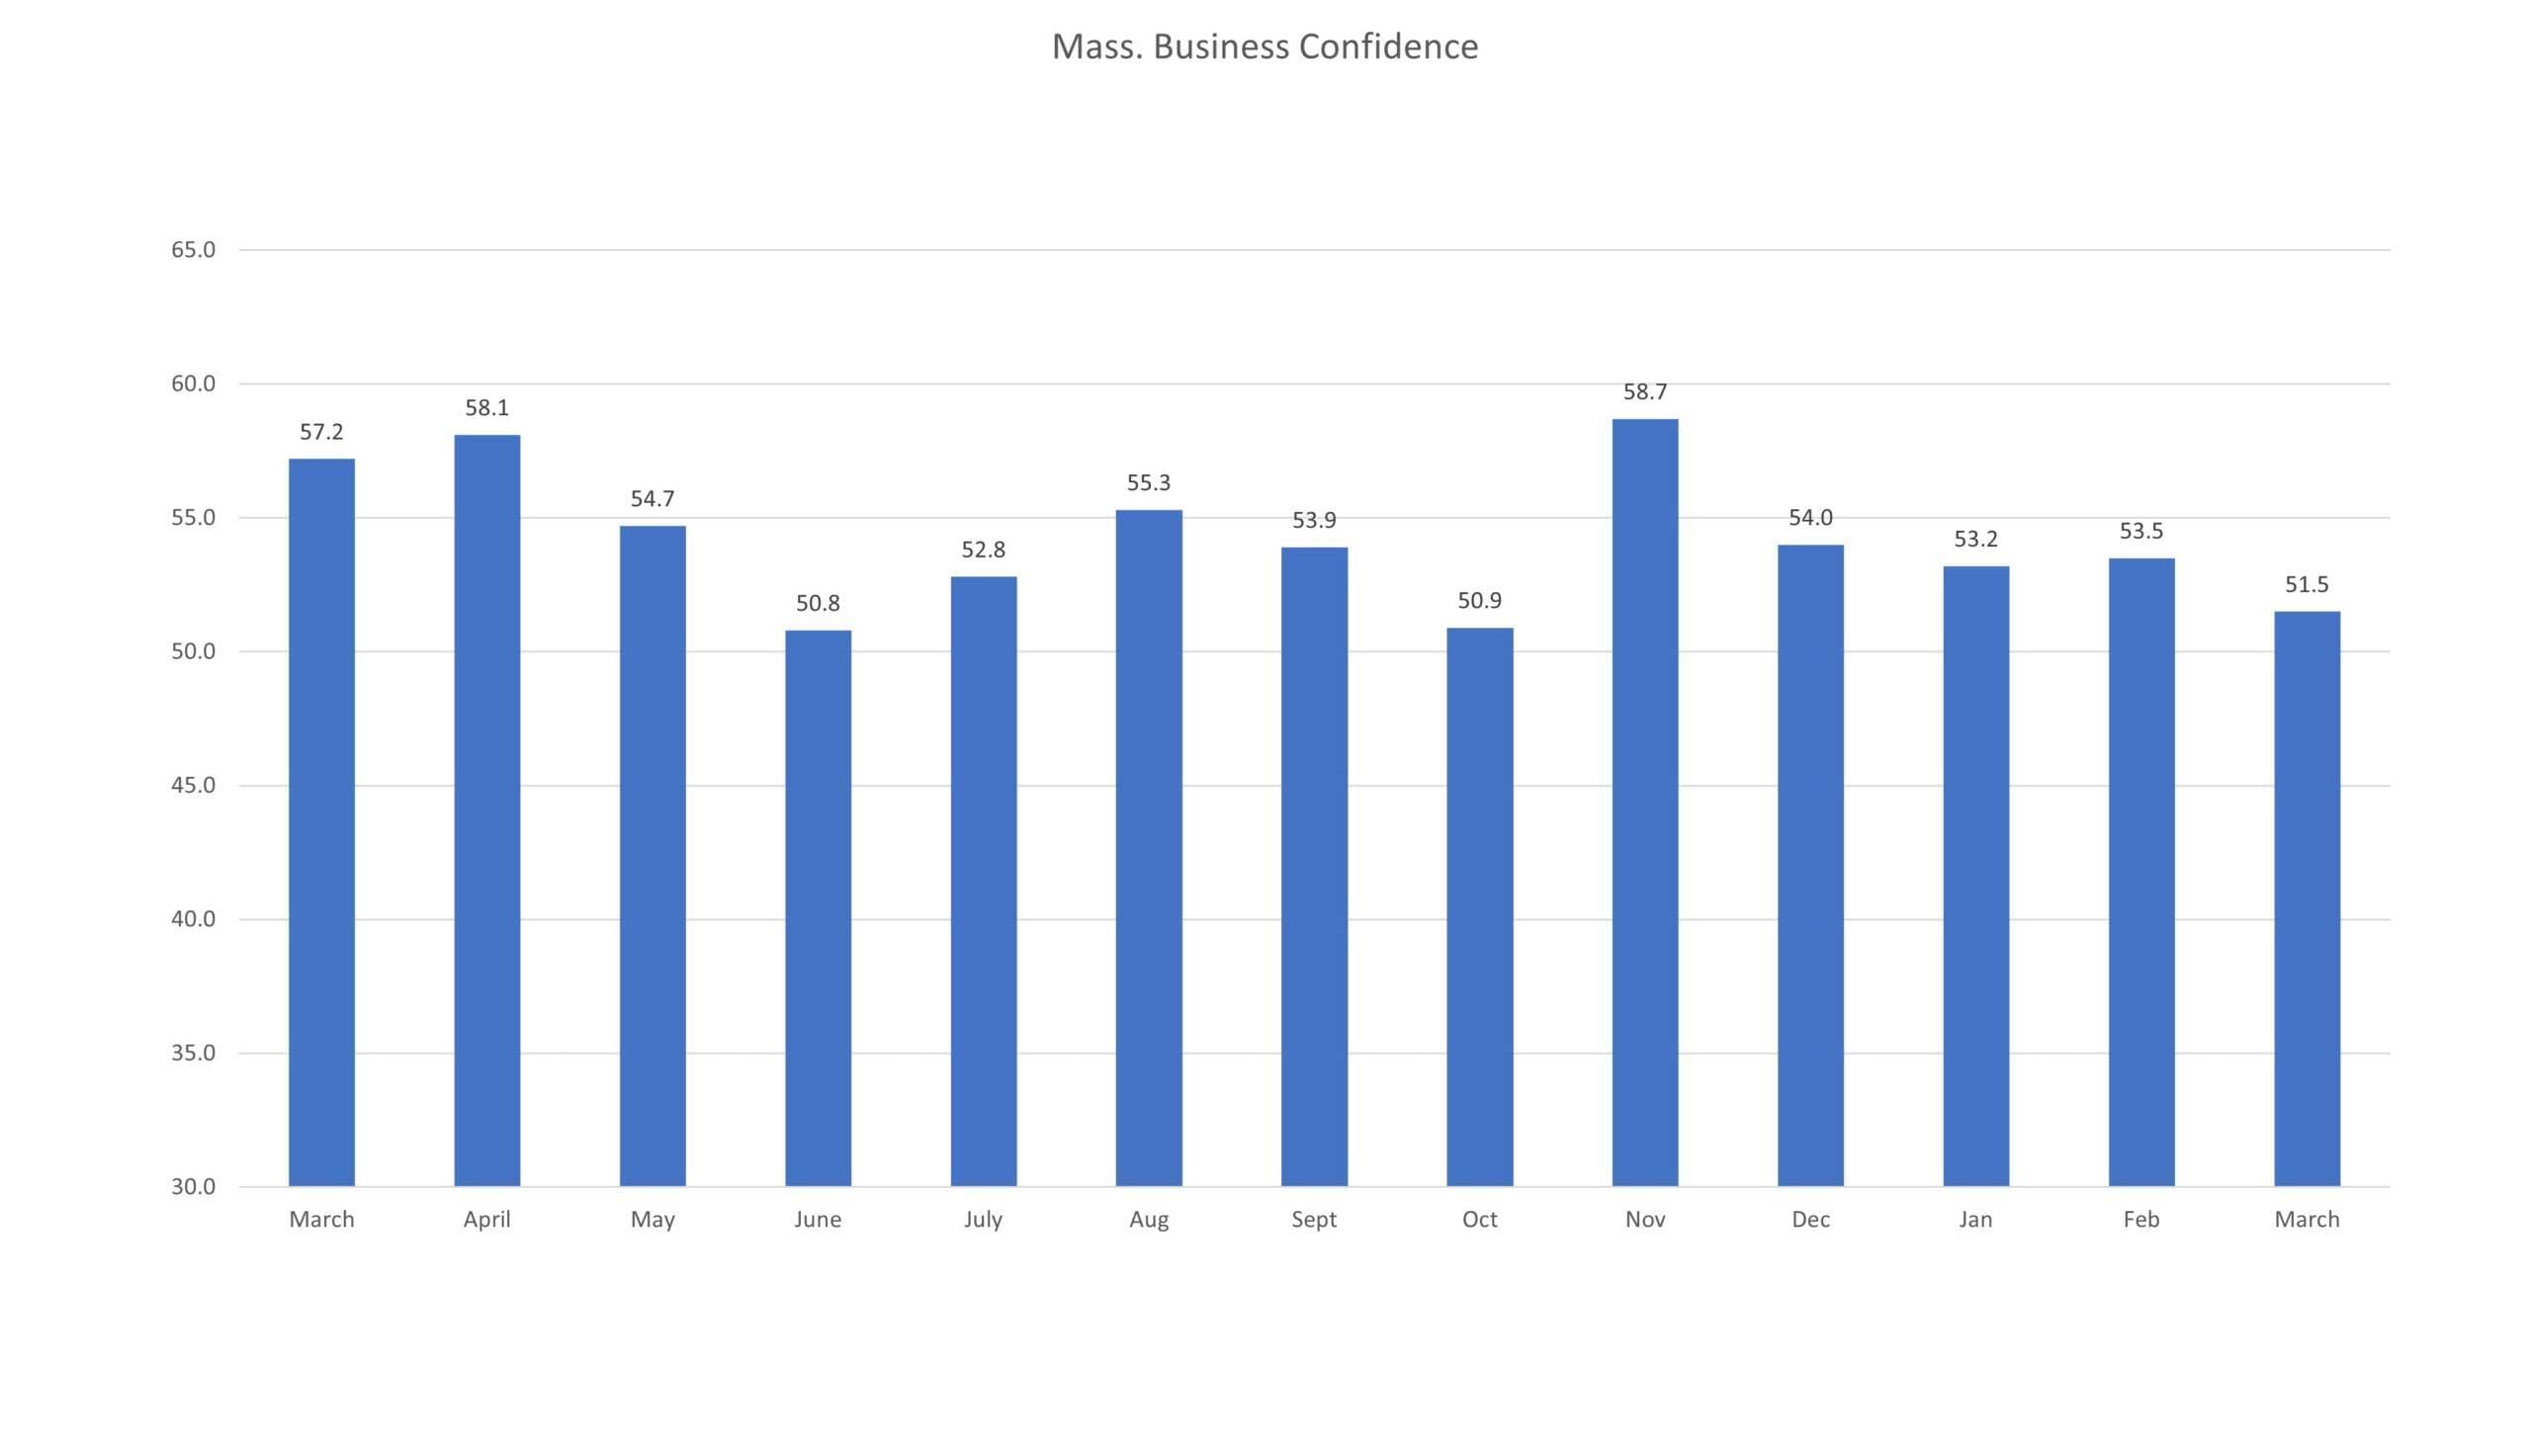 (Source: AIM Business Confidence Index)